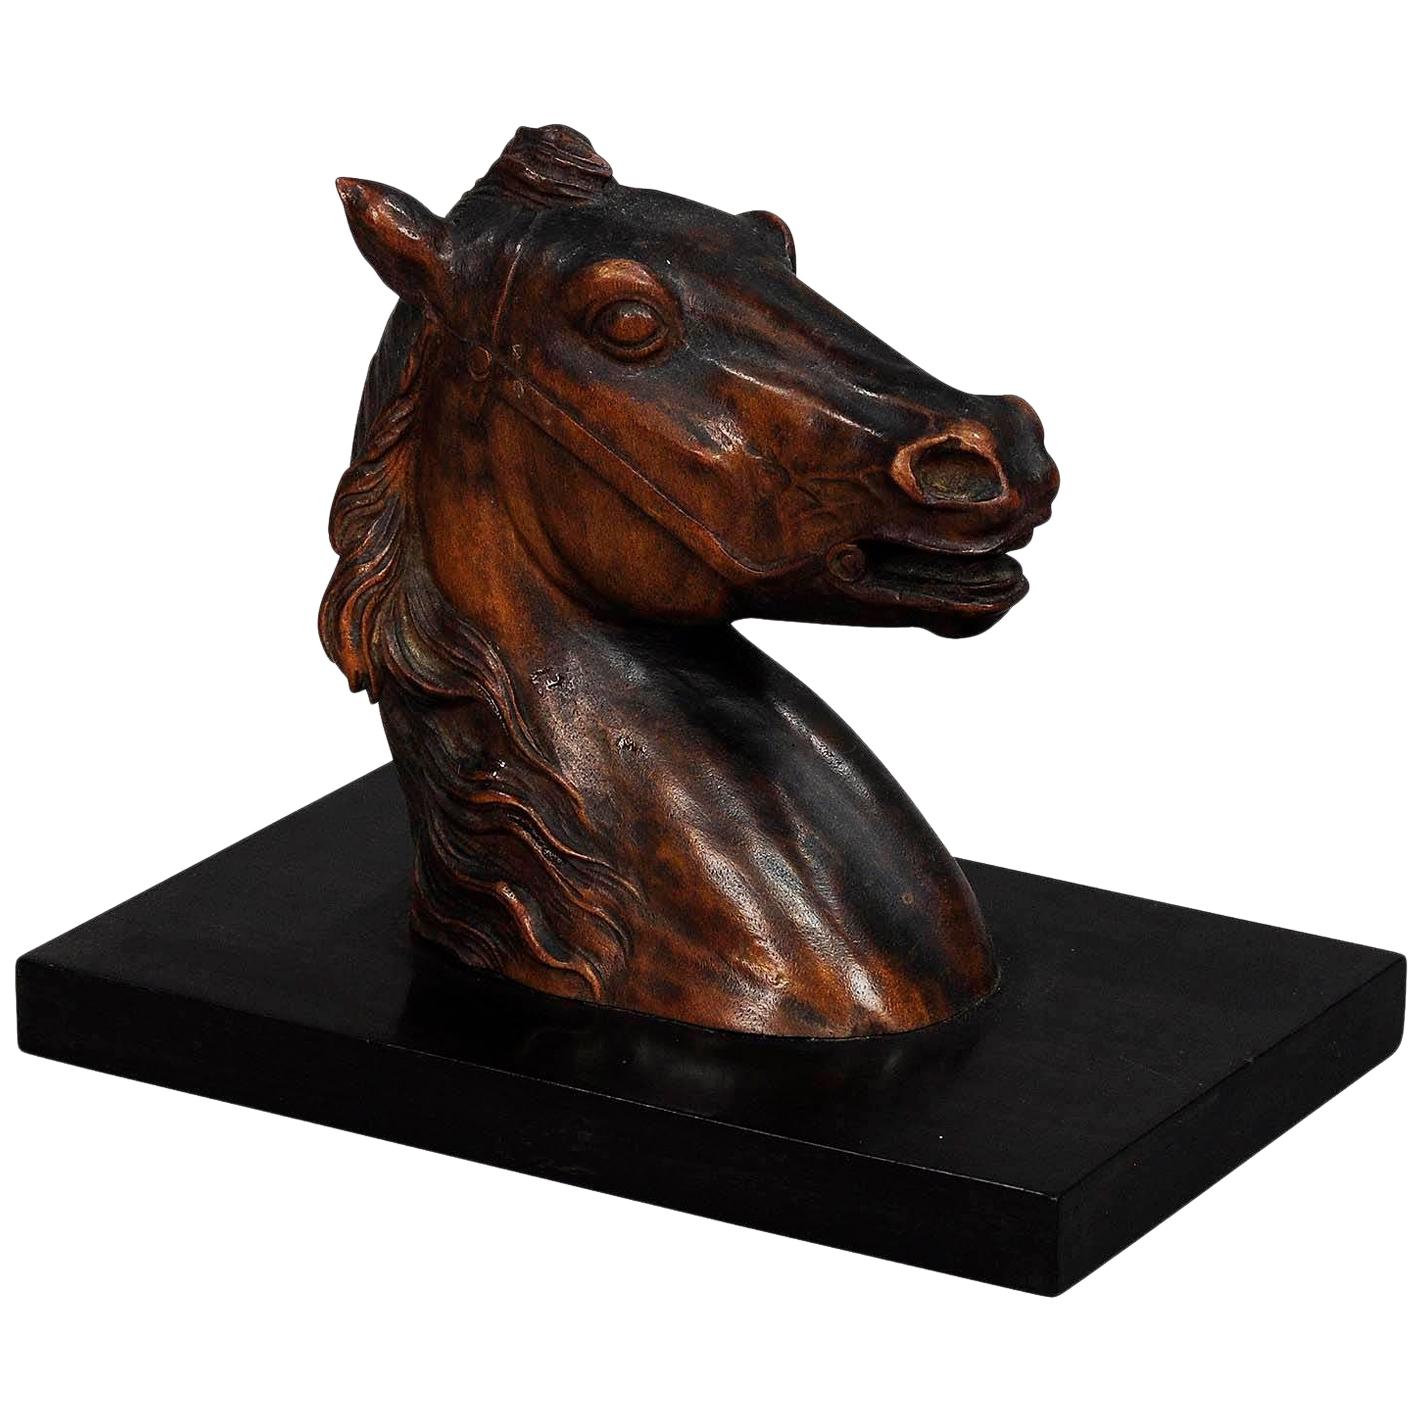 Antique Wooden Carved Horse Paper Weight, circa 1920